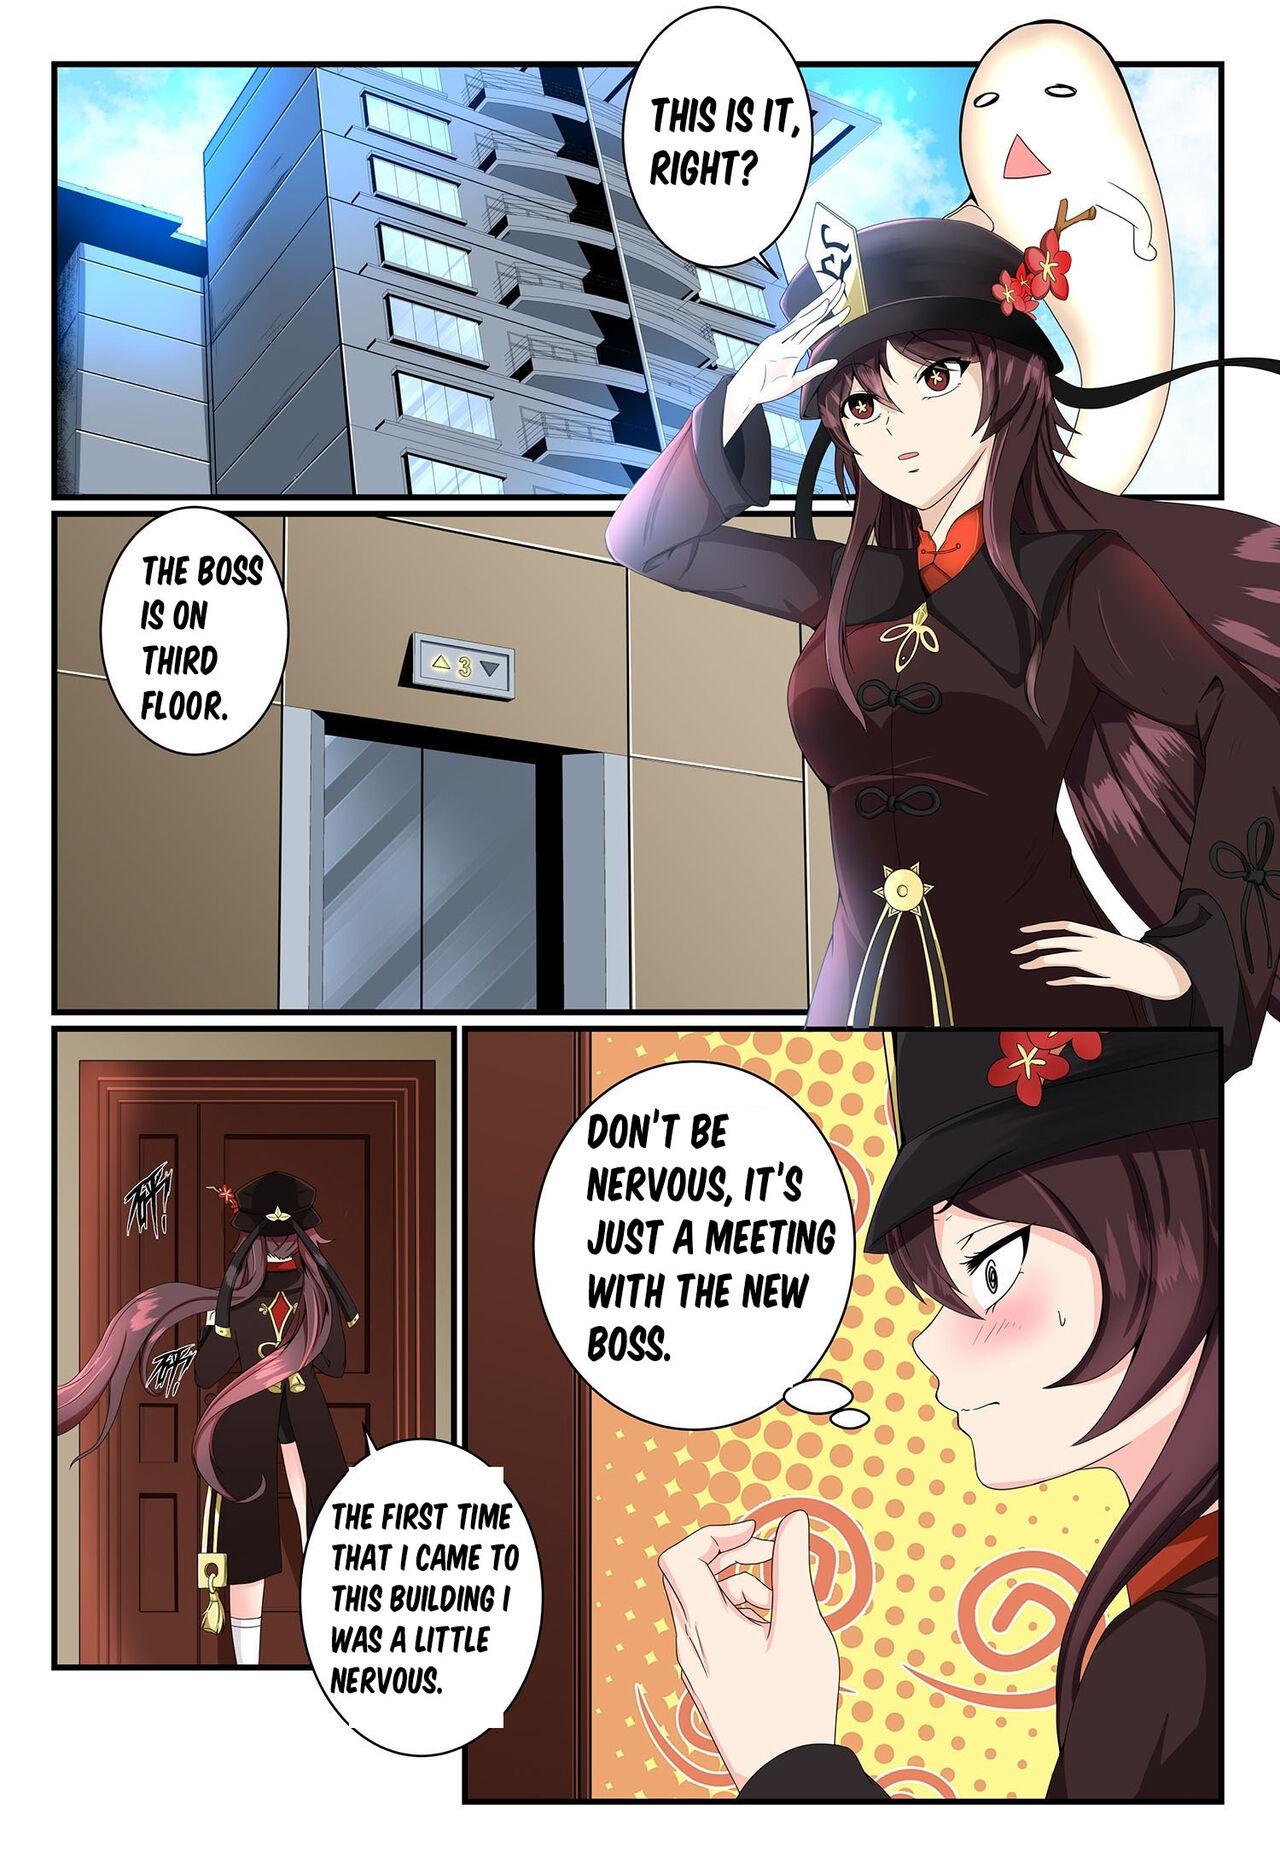 Smooth Enslaved Hu Tao - Chapter One - Genshin impact Real - Page 3